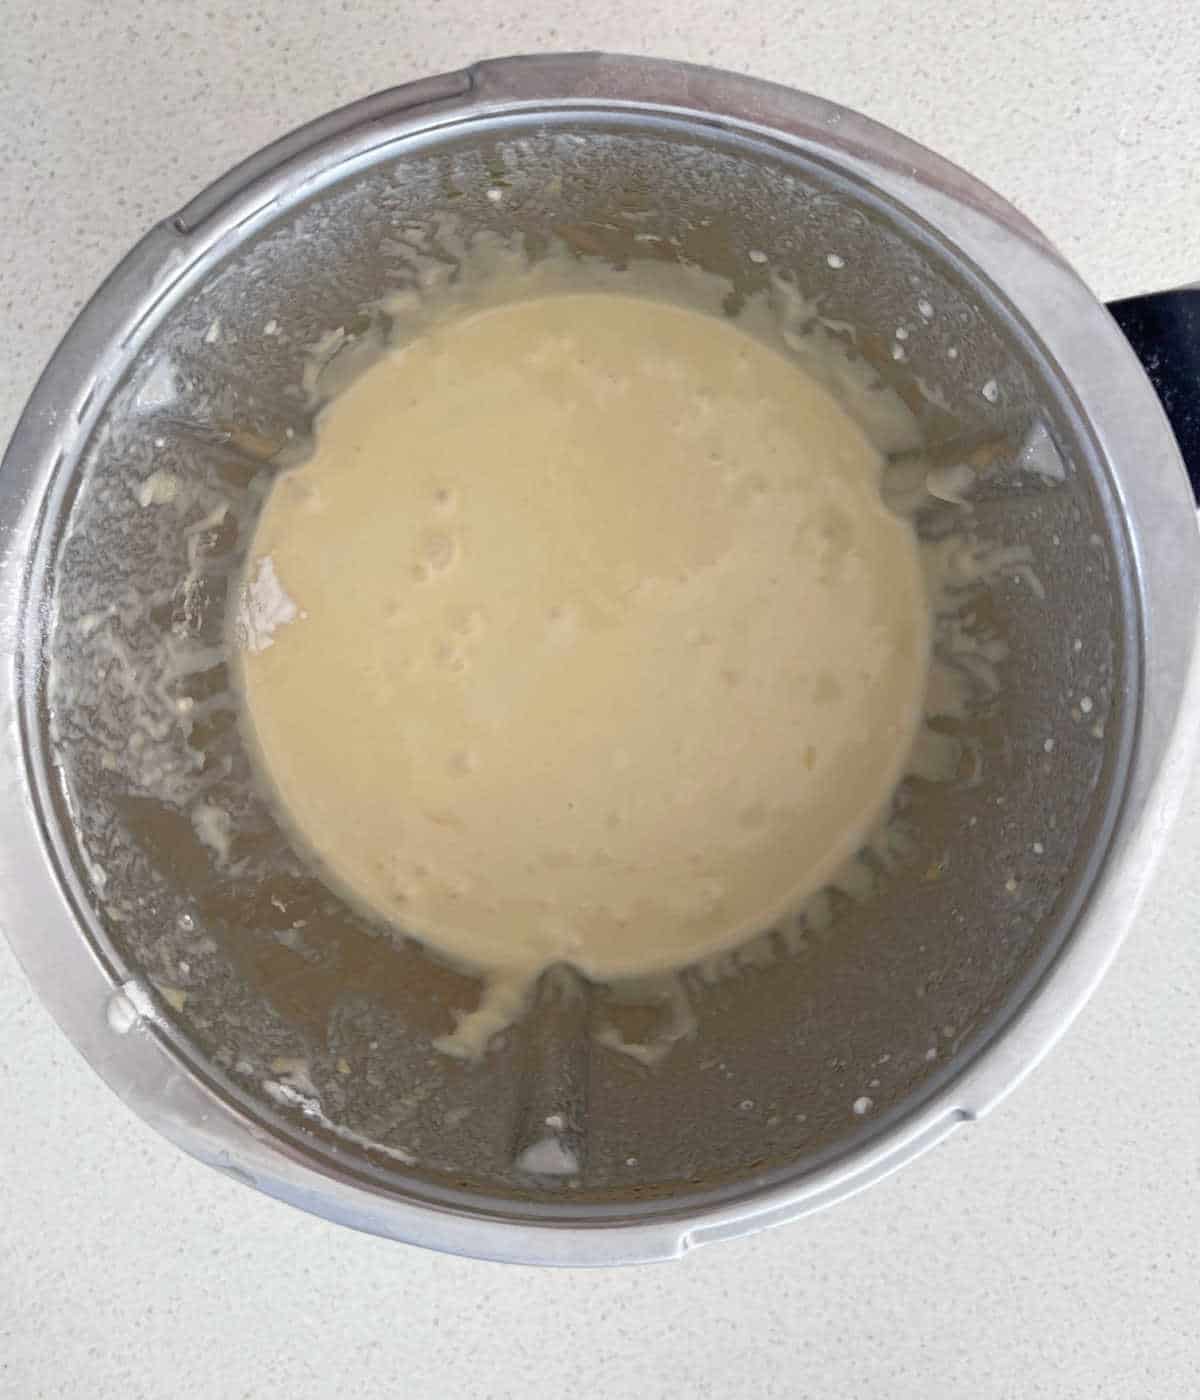 muffin mixture in athermomix bowl.